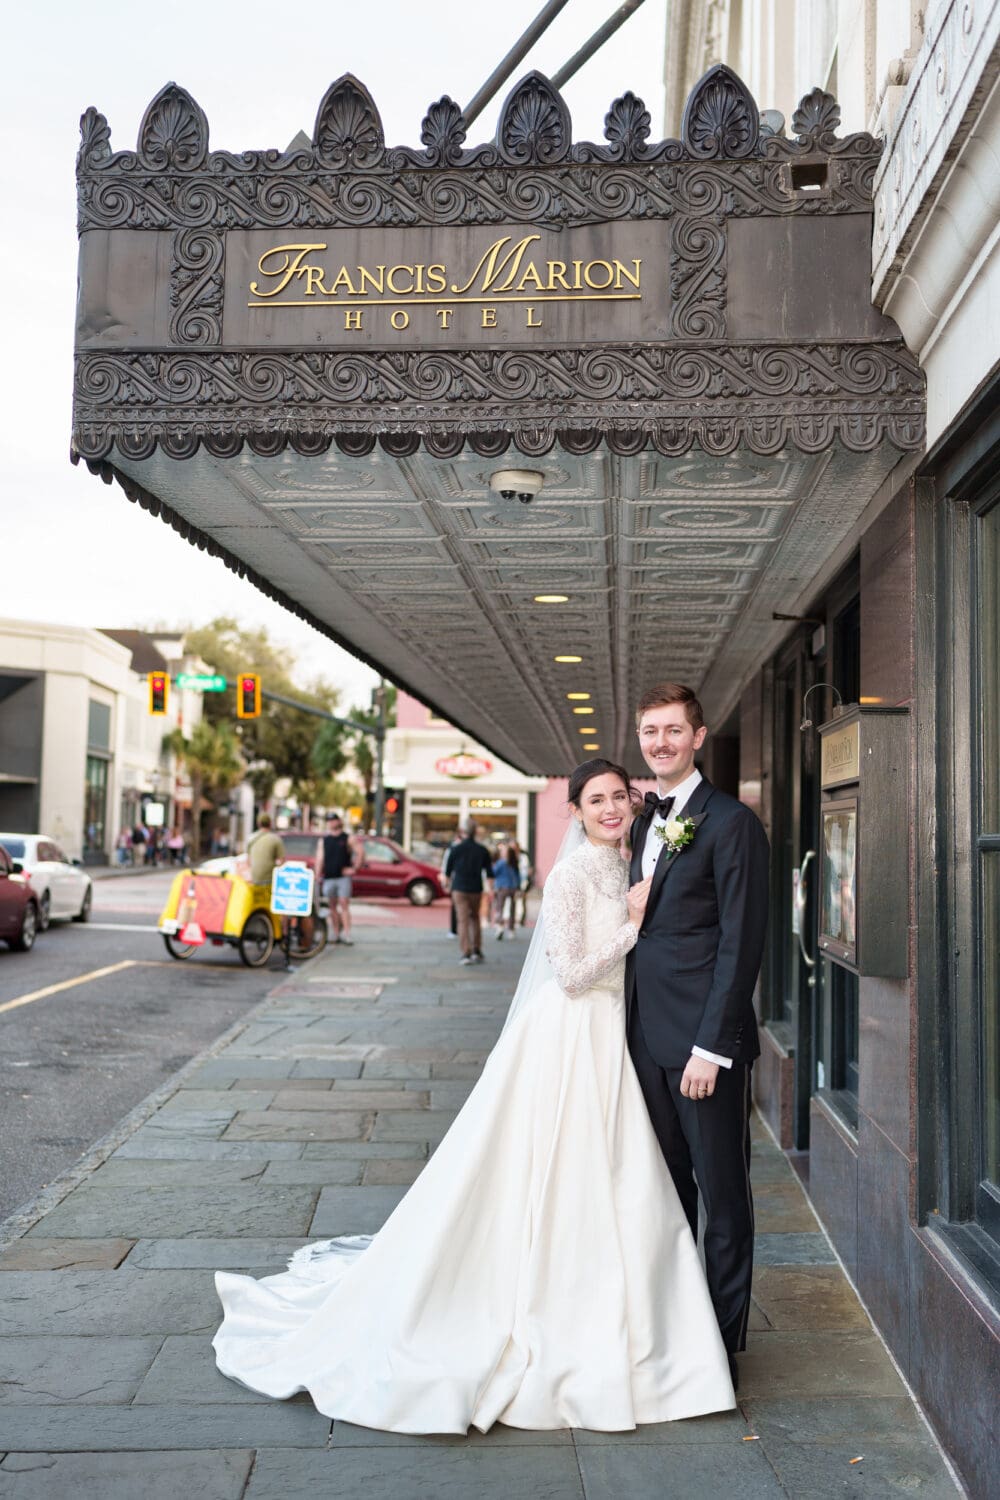 Bride and groom under the Francis Marion hotel awning - Francis Marion Charleston